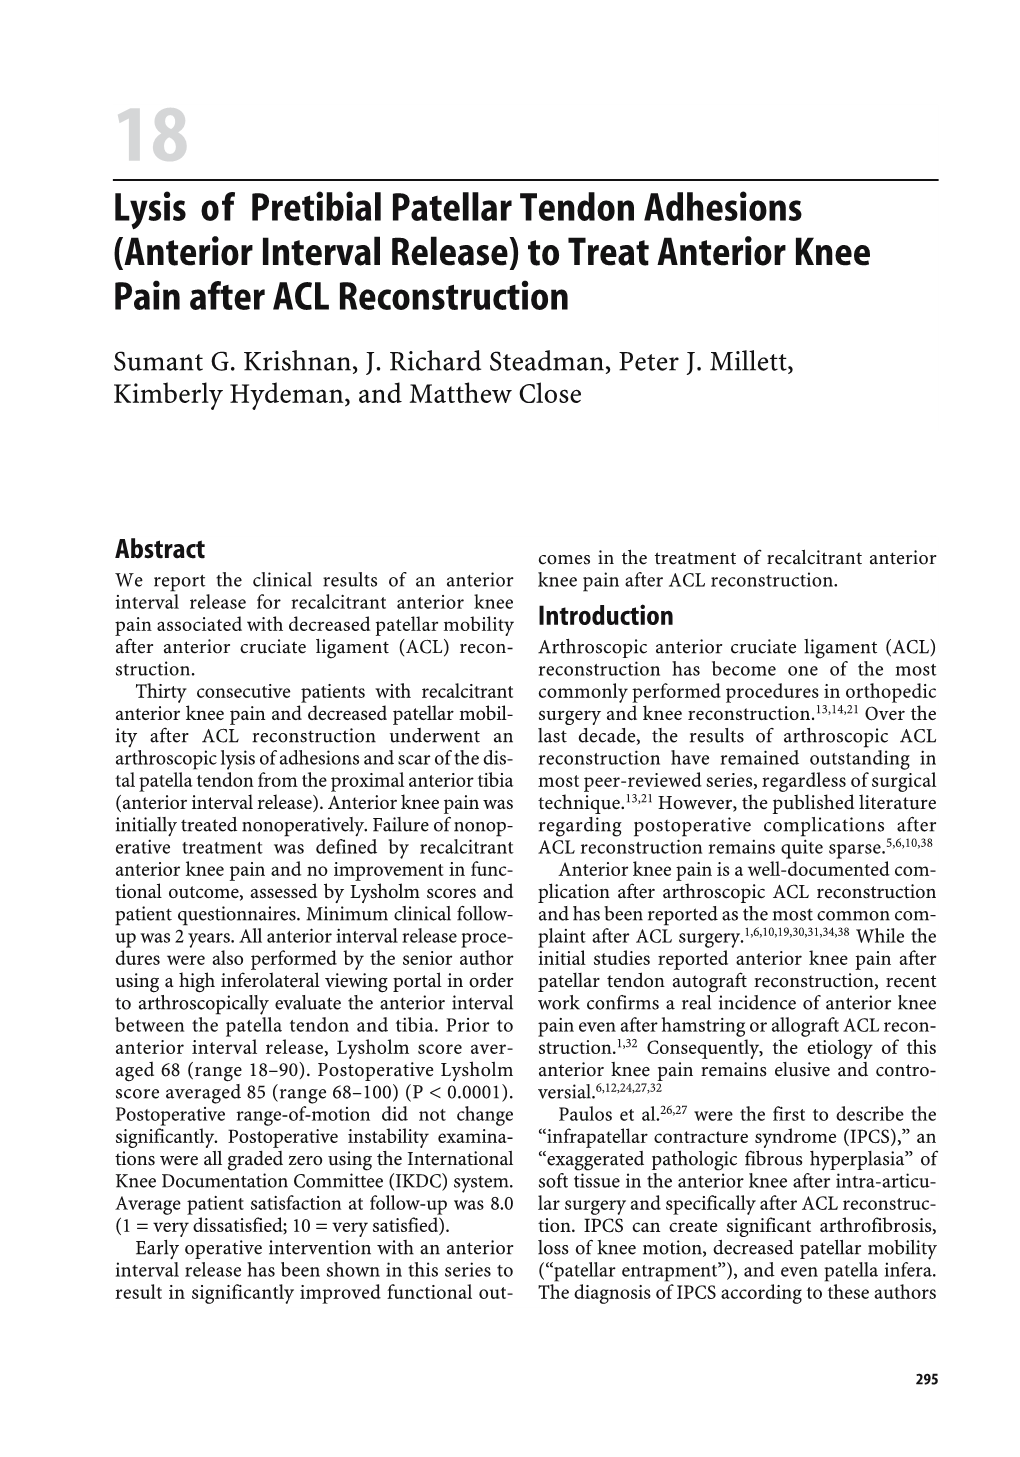 Anterior Interval Release) to Treat Anterior Knee Pain After ACL Reconstruction